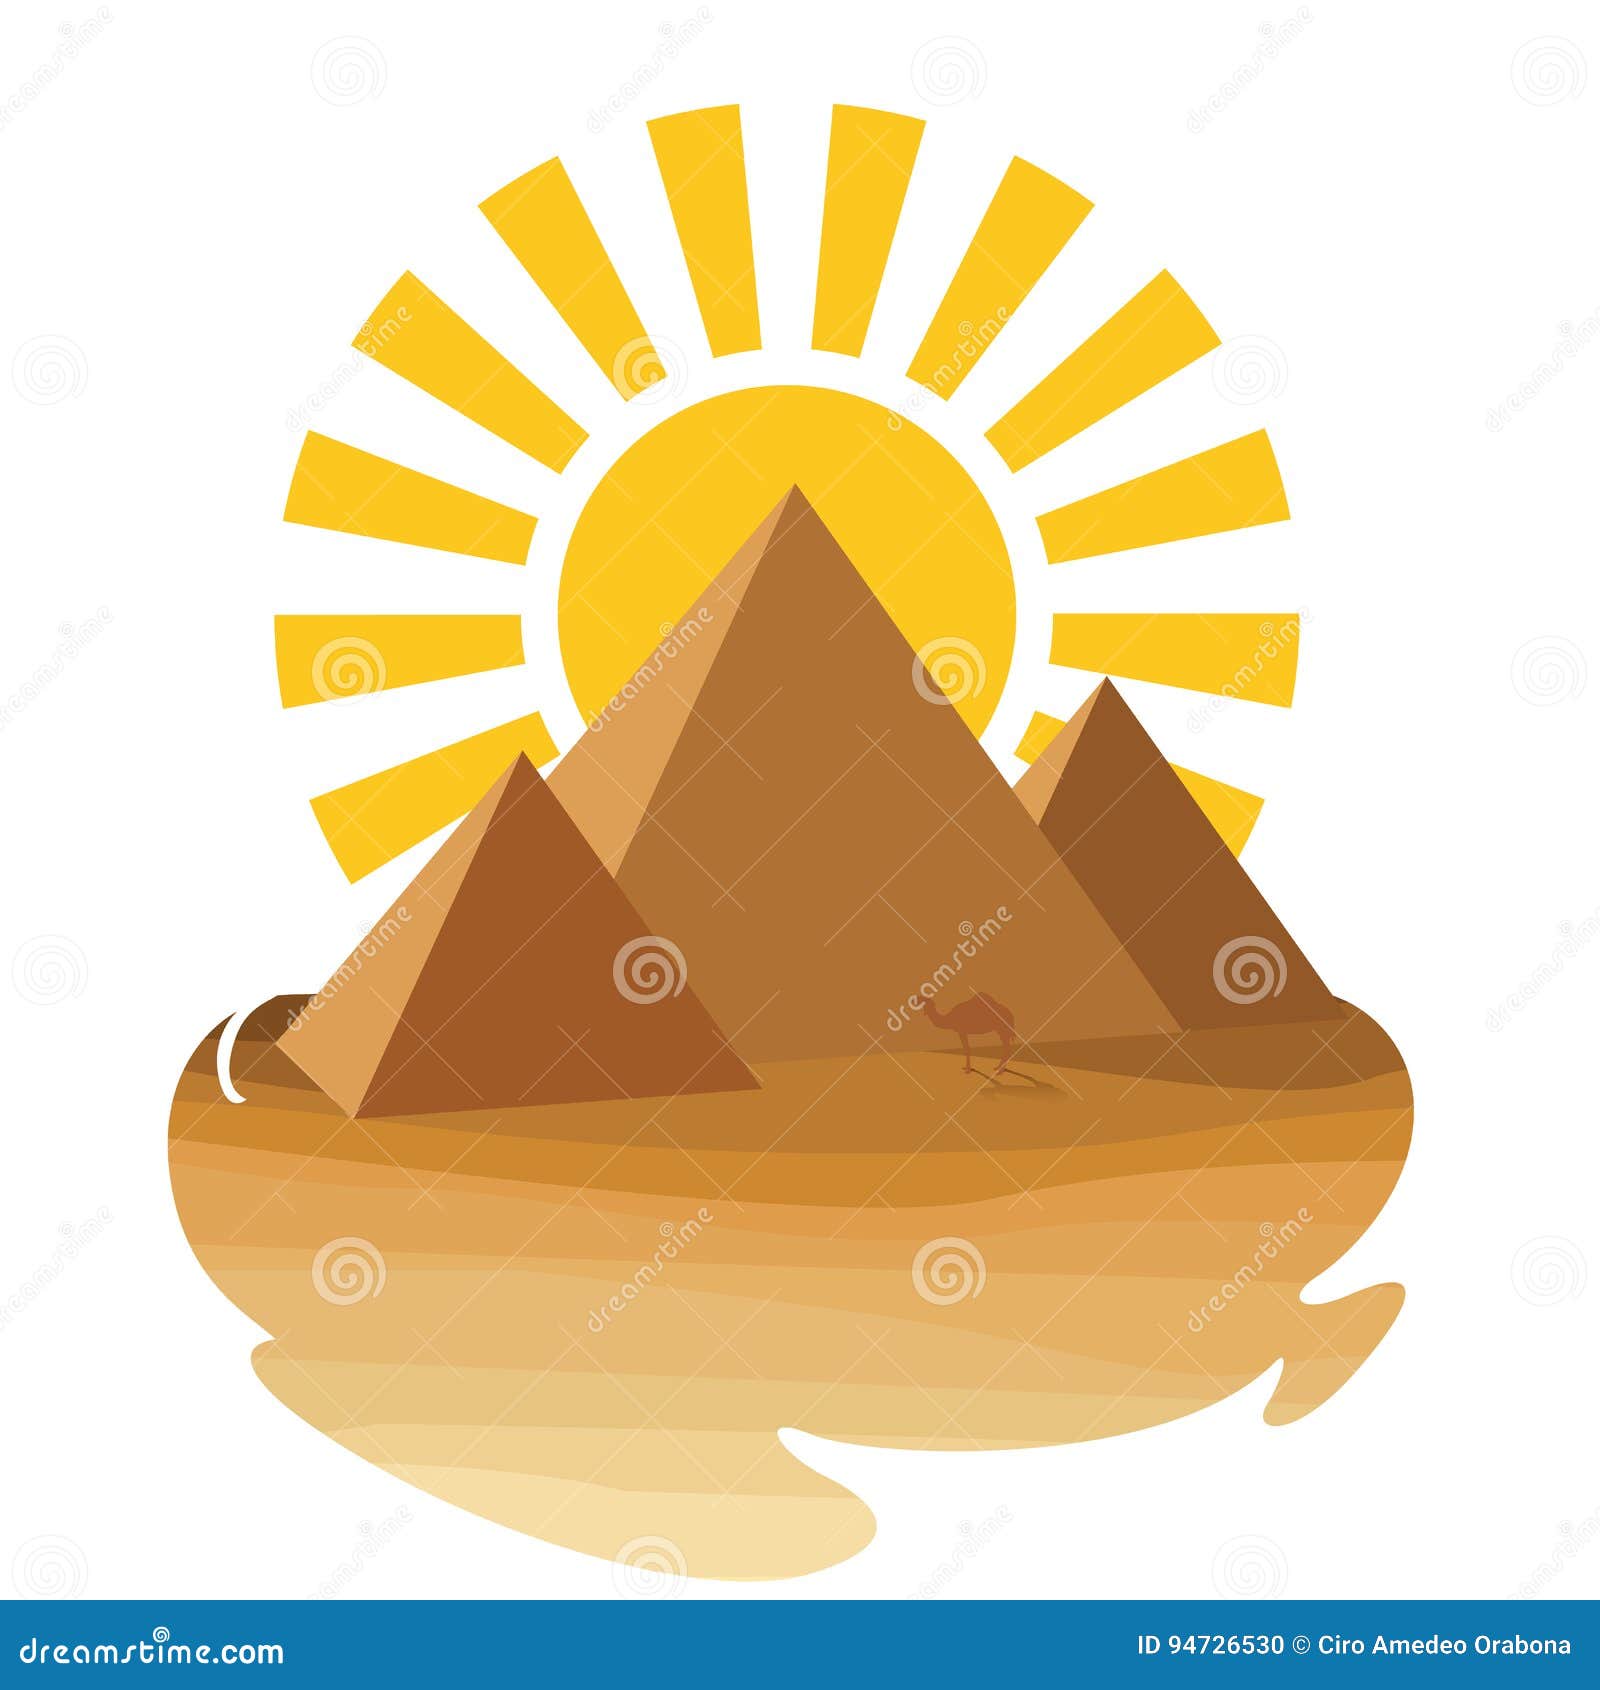 Desert with pyramid stock vector. Illustration of silhouette - 94726530